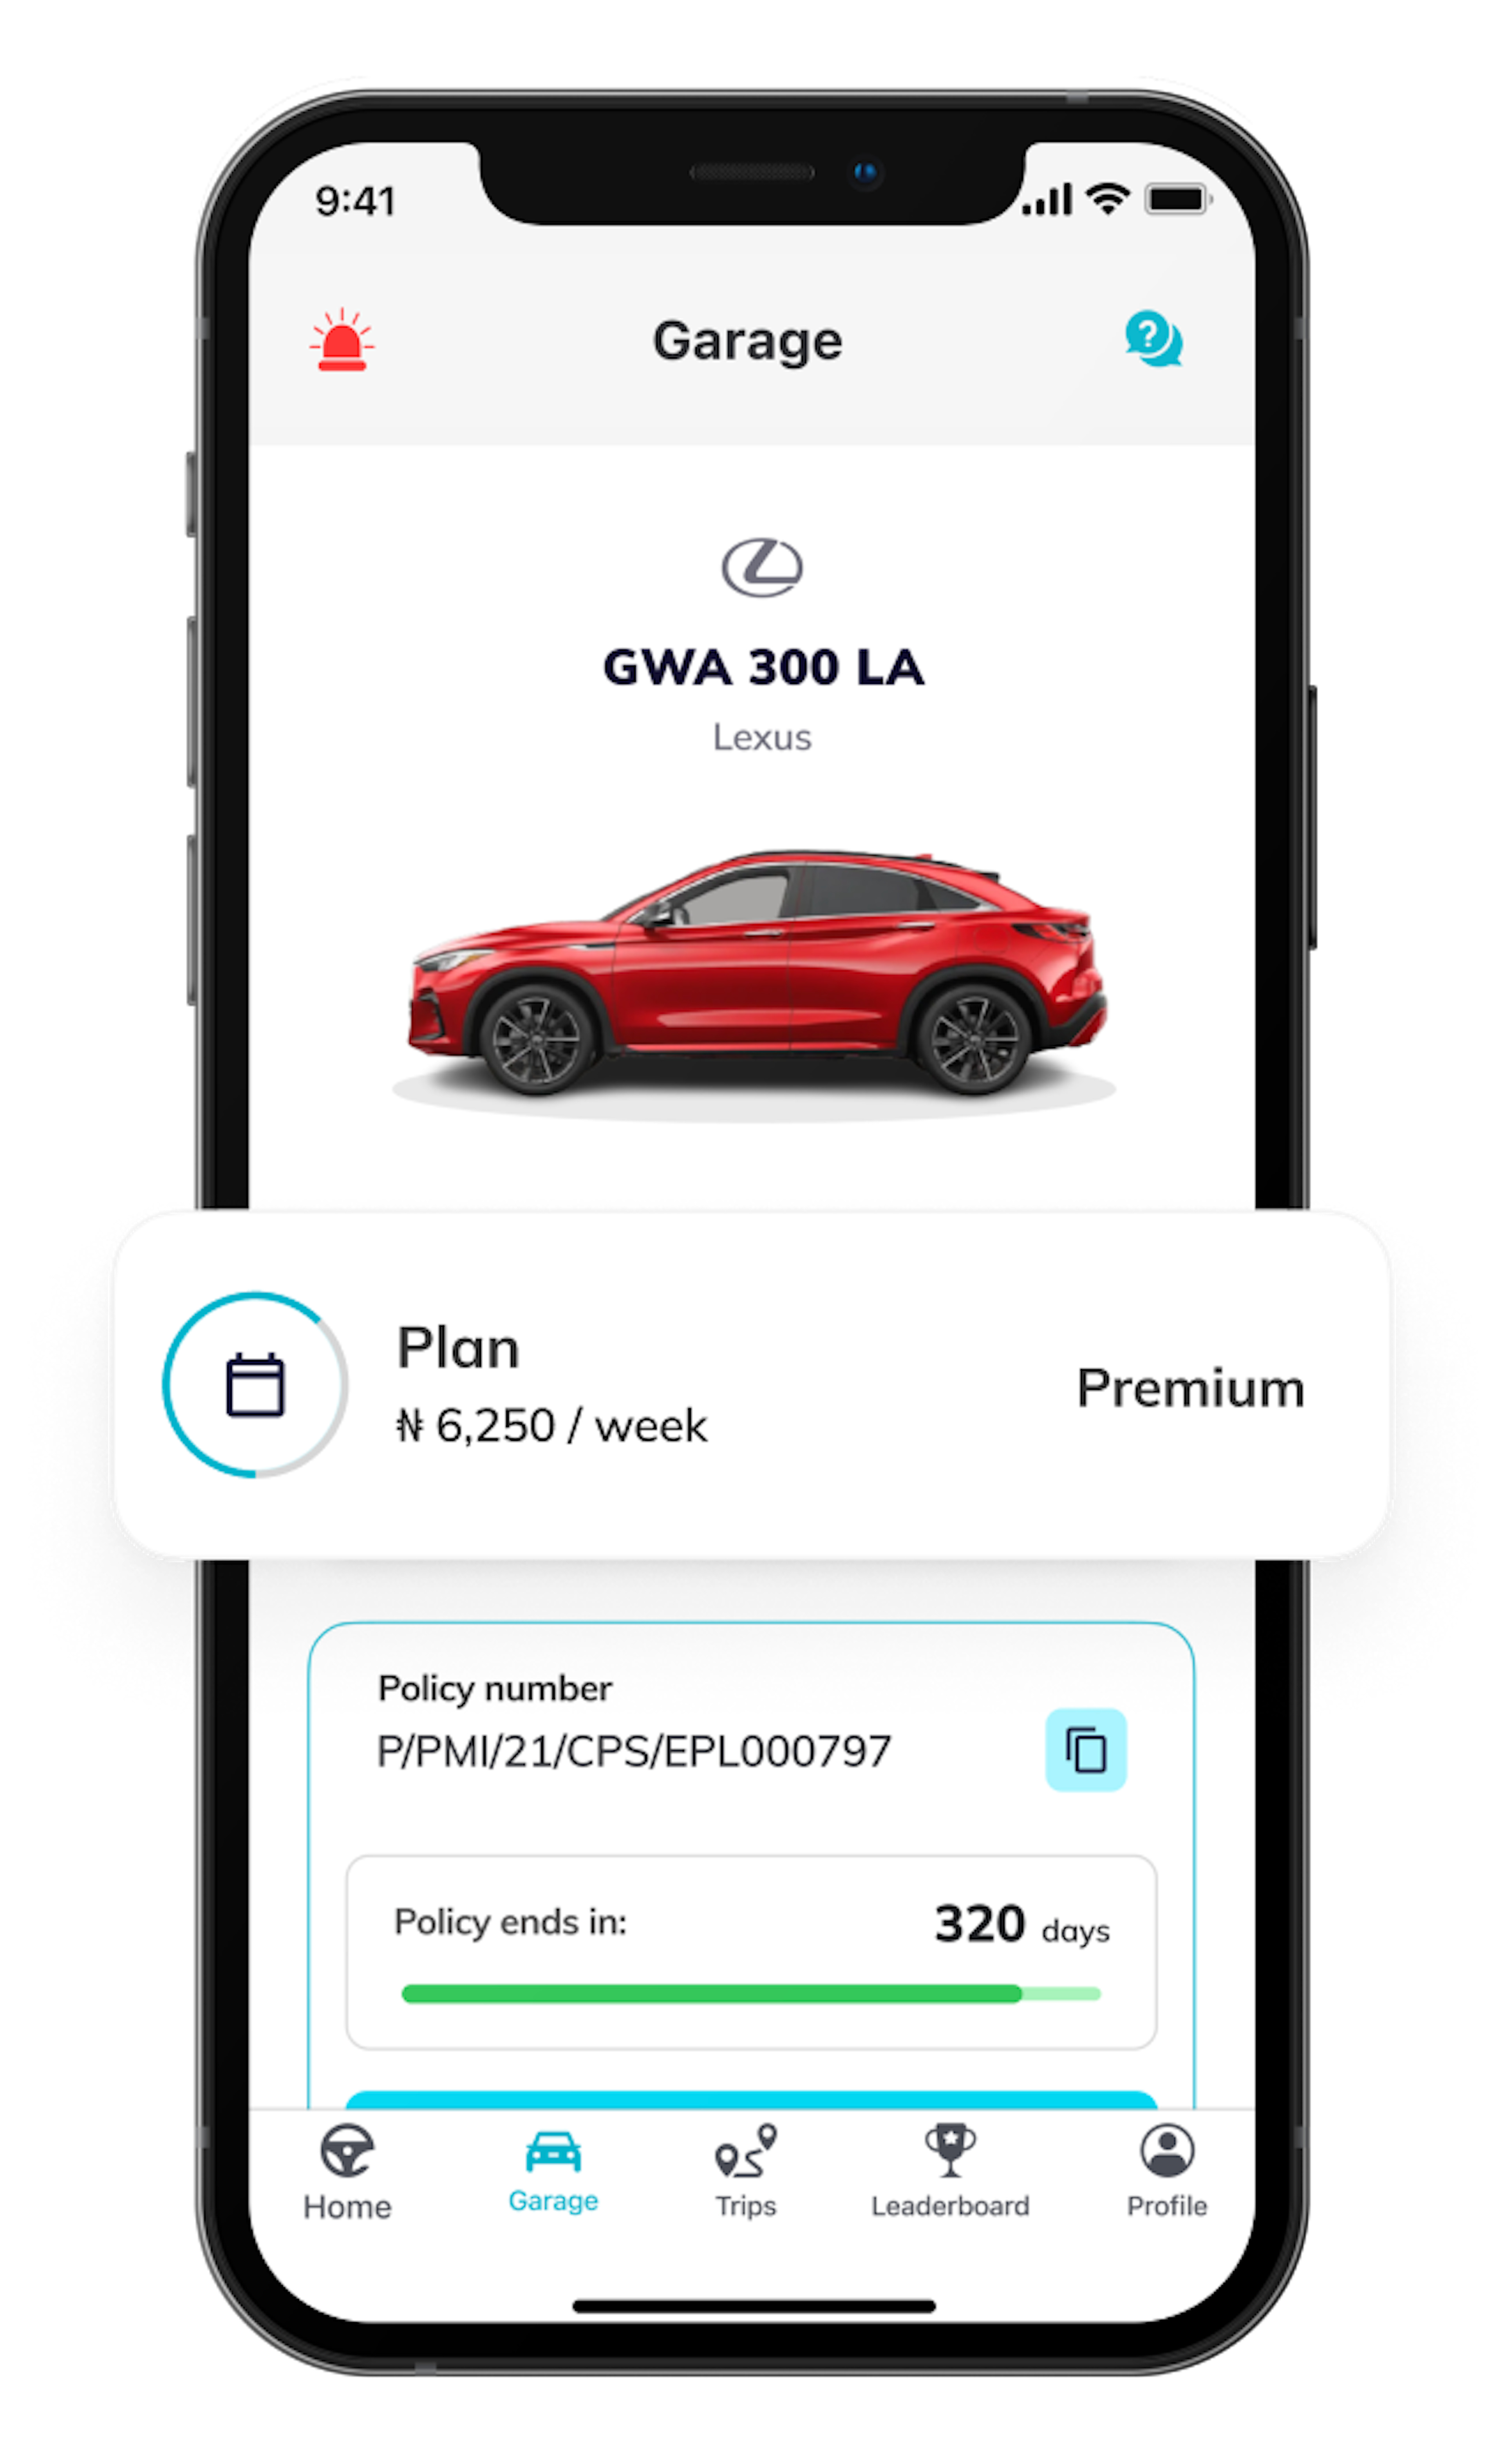 car insurance app - claims, insurance policy